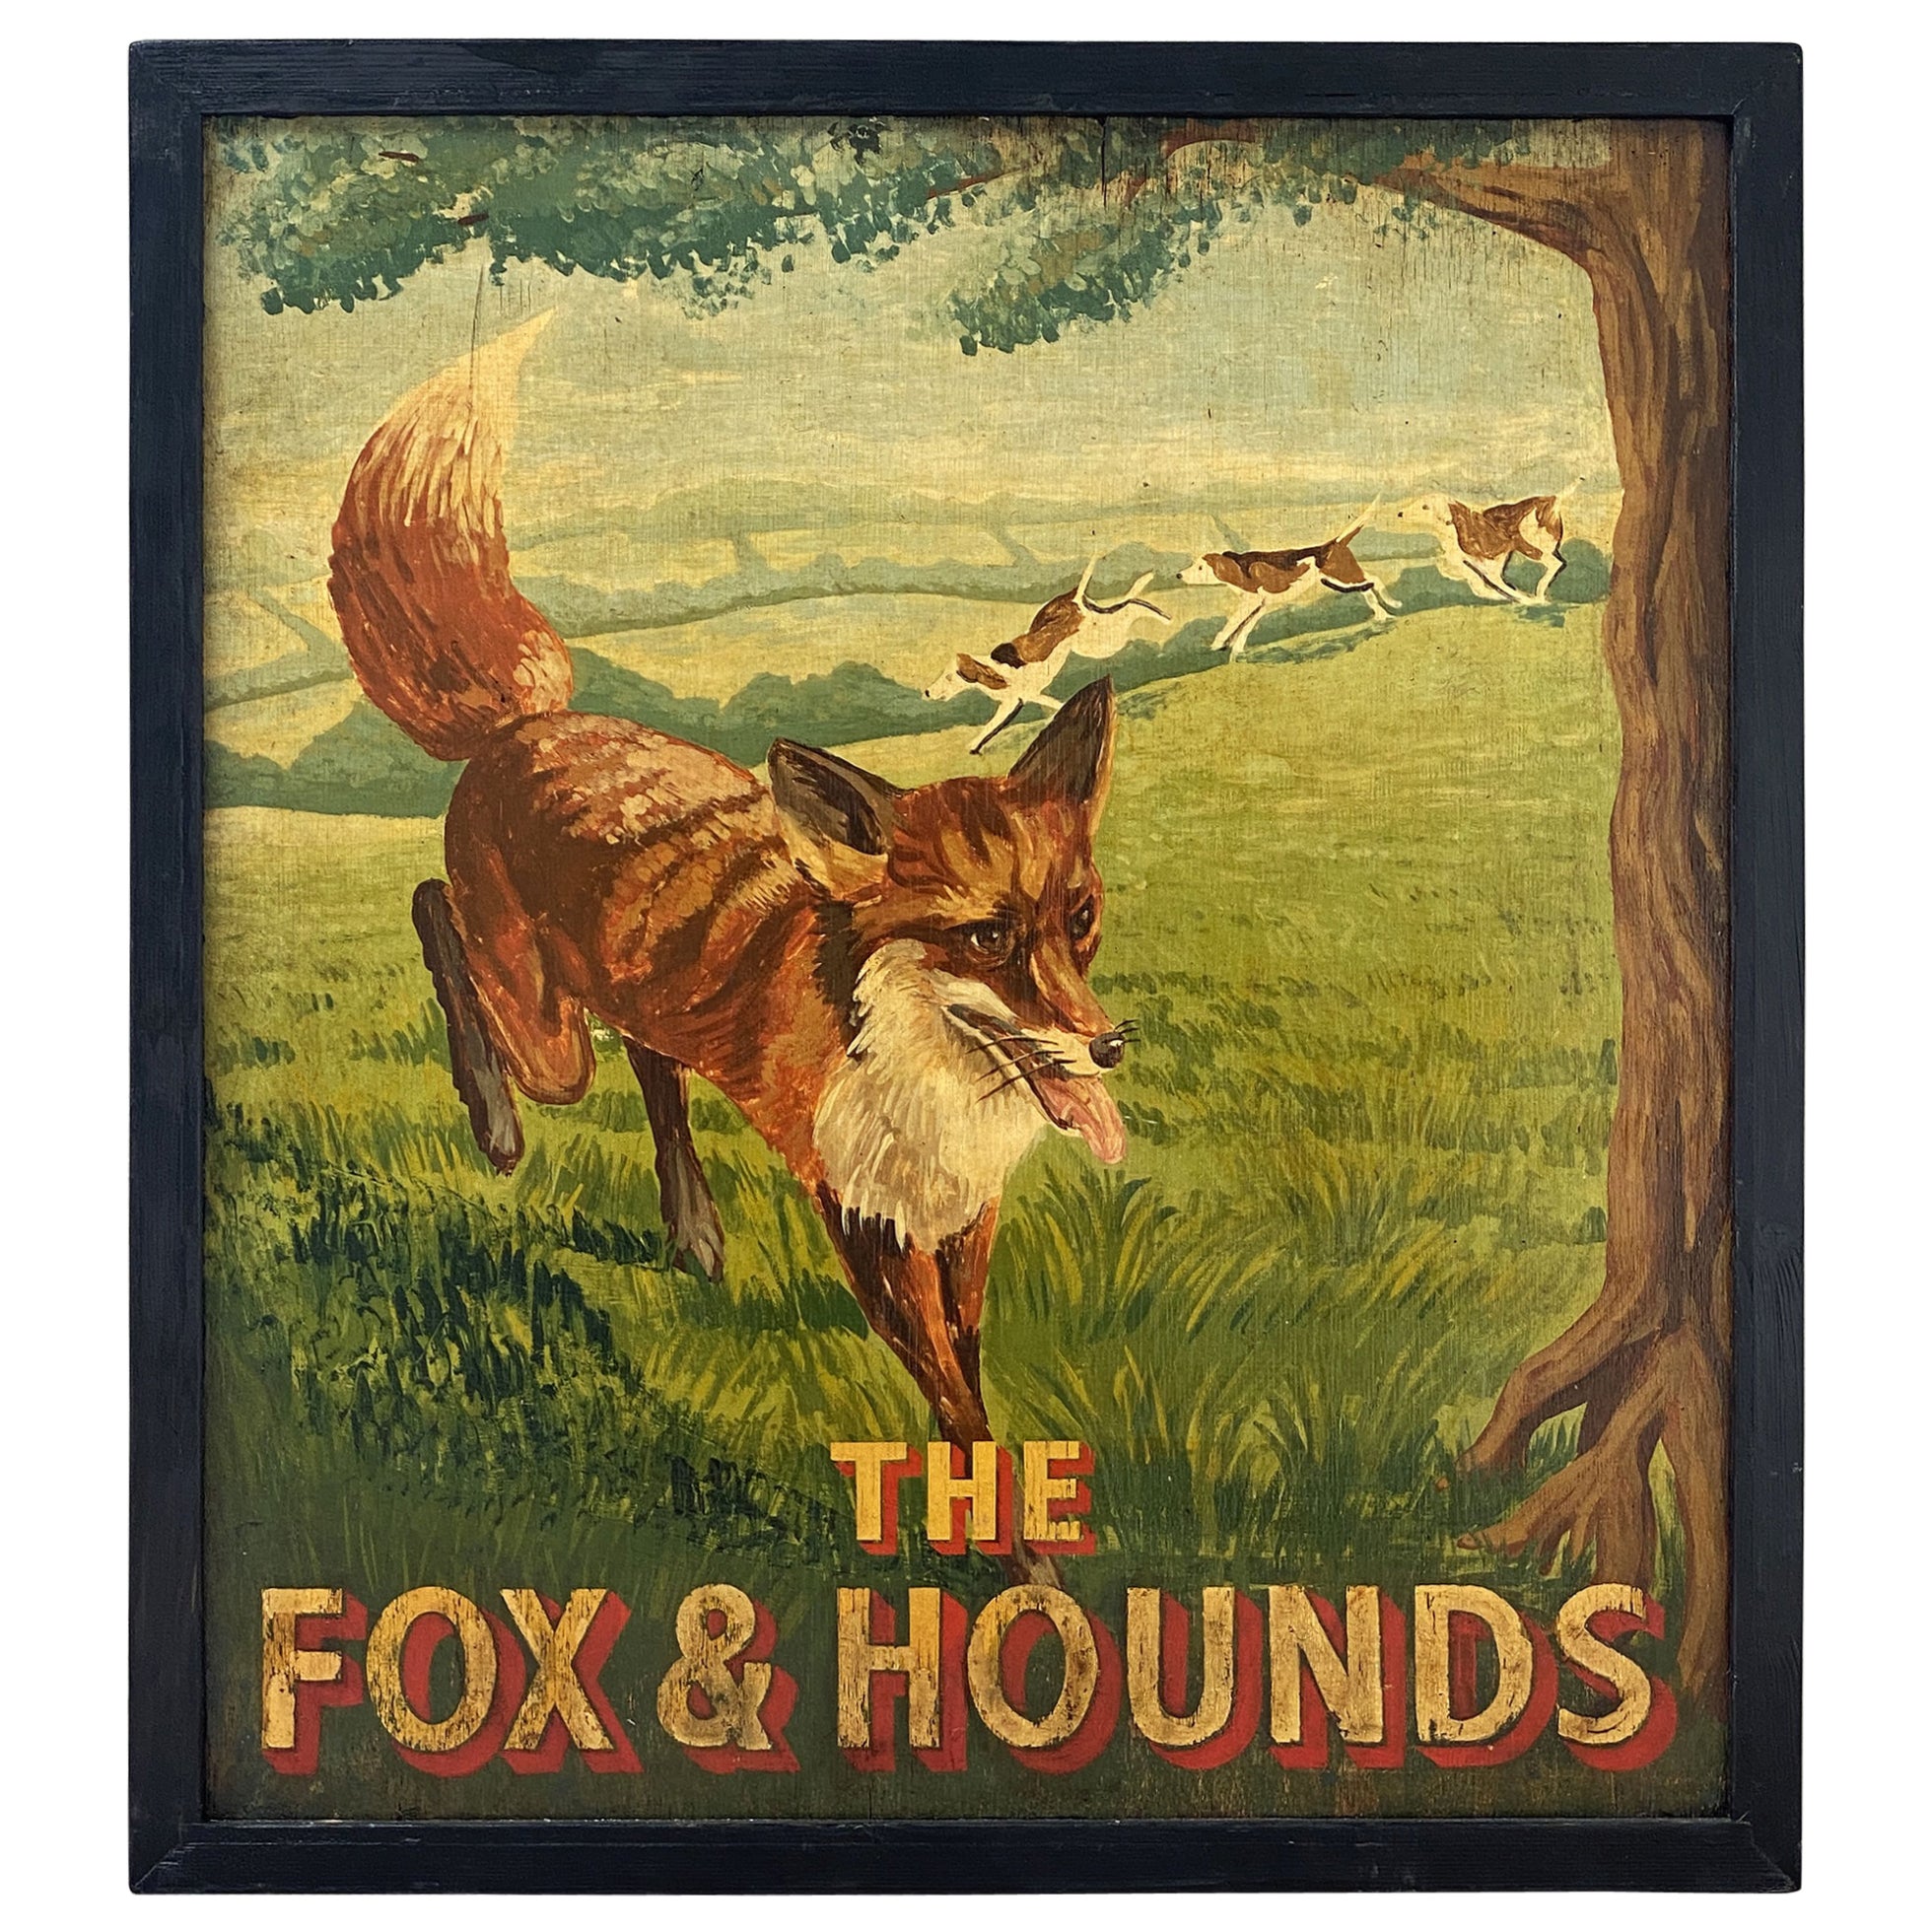 English Pub Sign, "The Fox & Hounds" For Sale